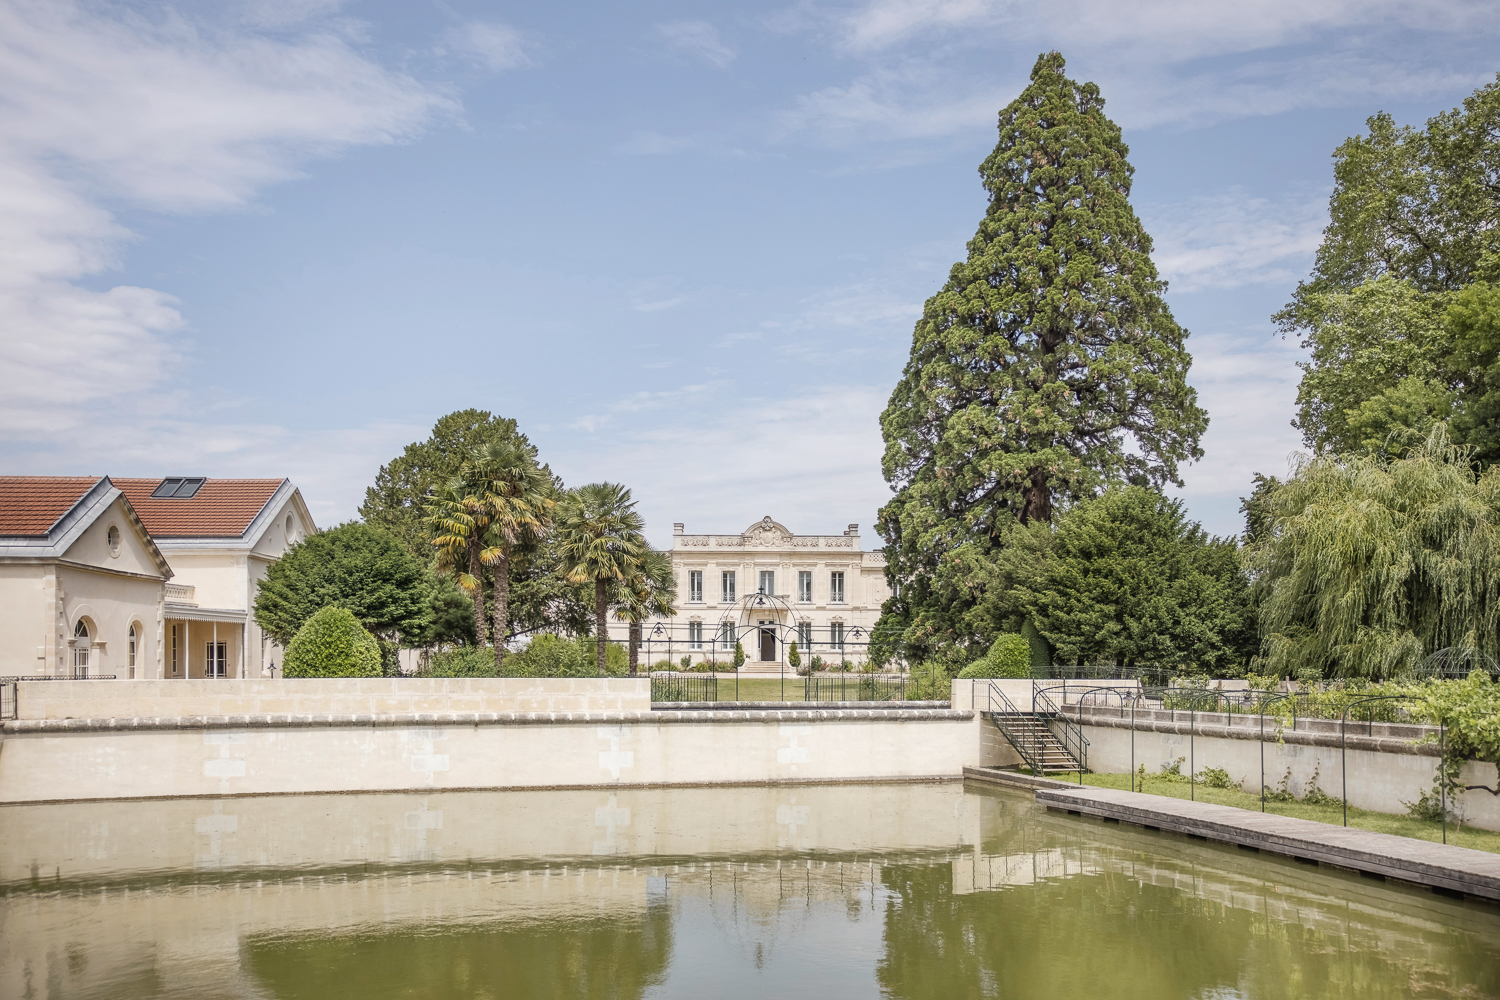 Opening in 2023, the Almae Collection’s new hotel is a handsome belle époque mansion and former cognac distillery set in idyllic grounds beside the River Charente, just a short drive or boat ride from the town of Cognac. 